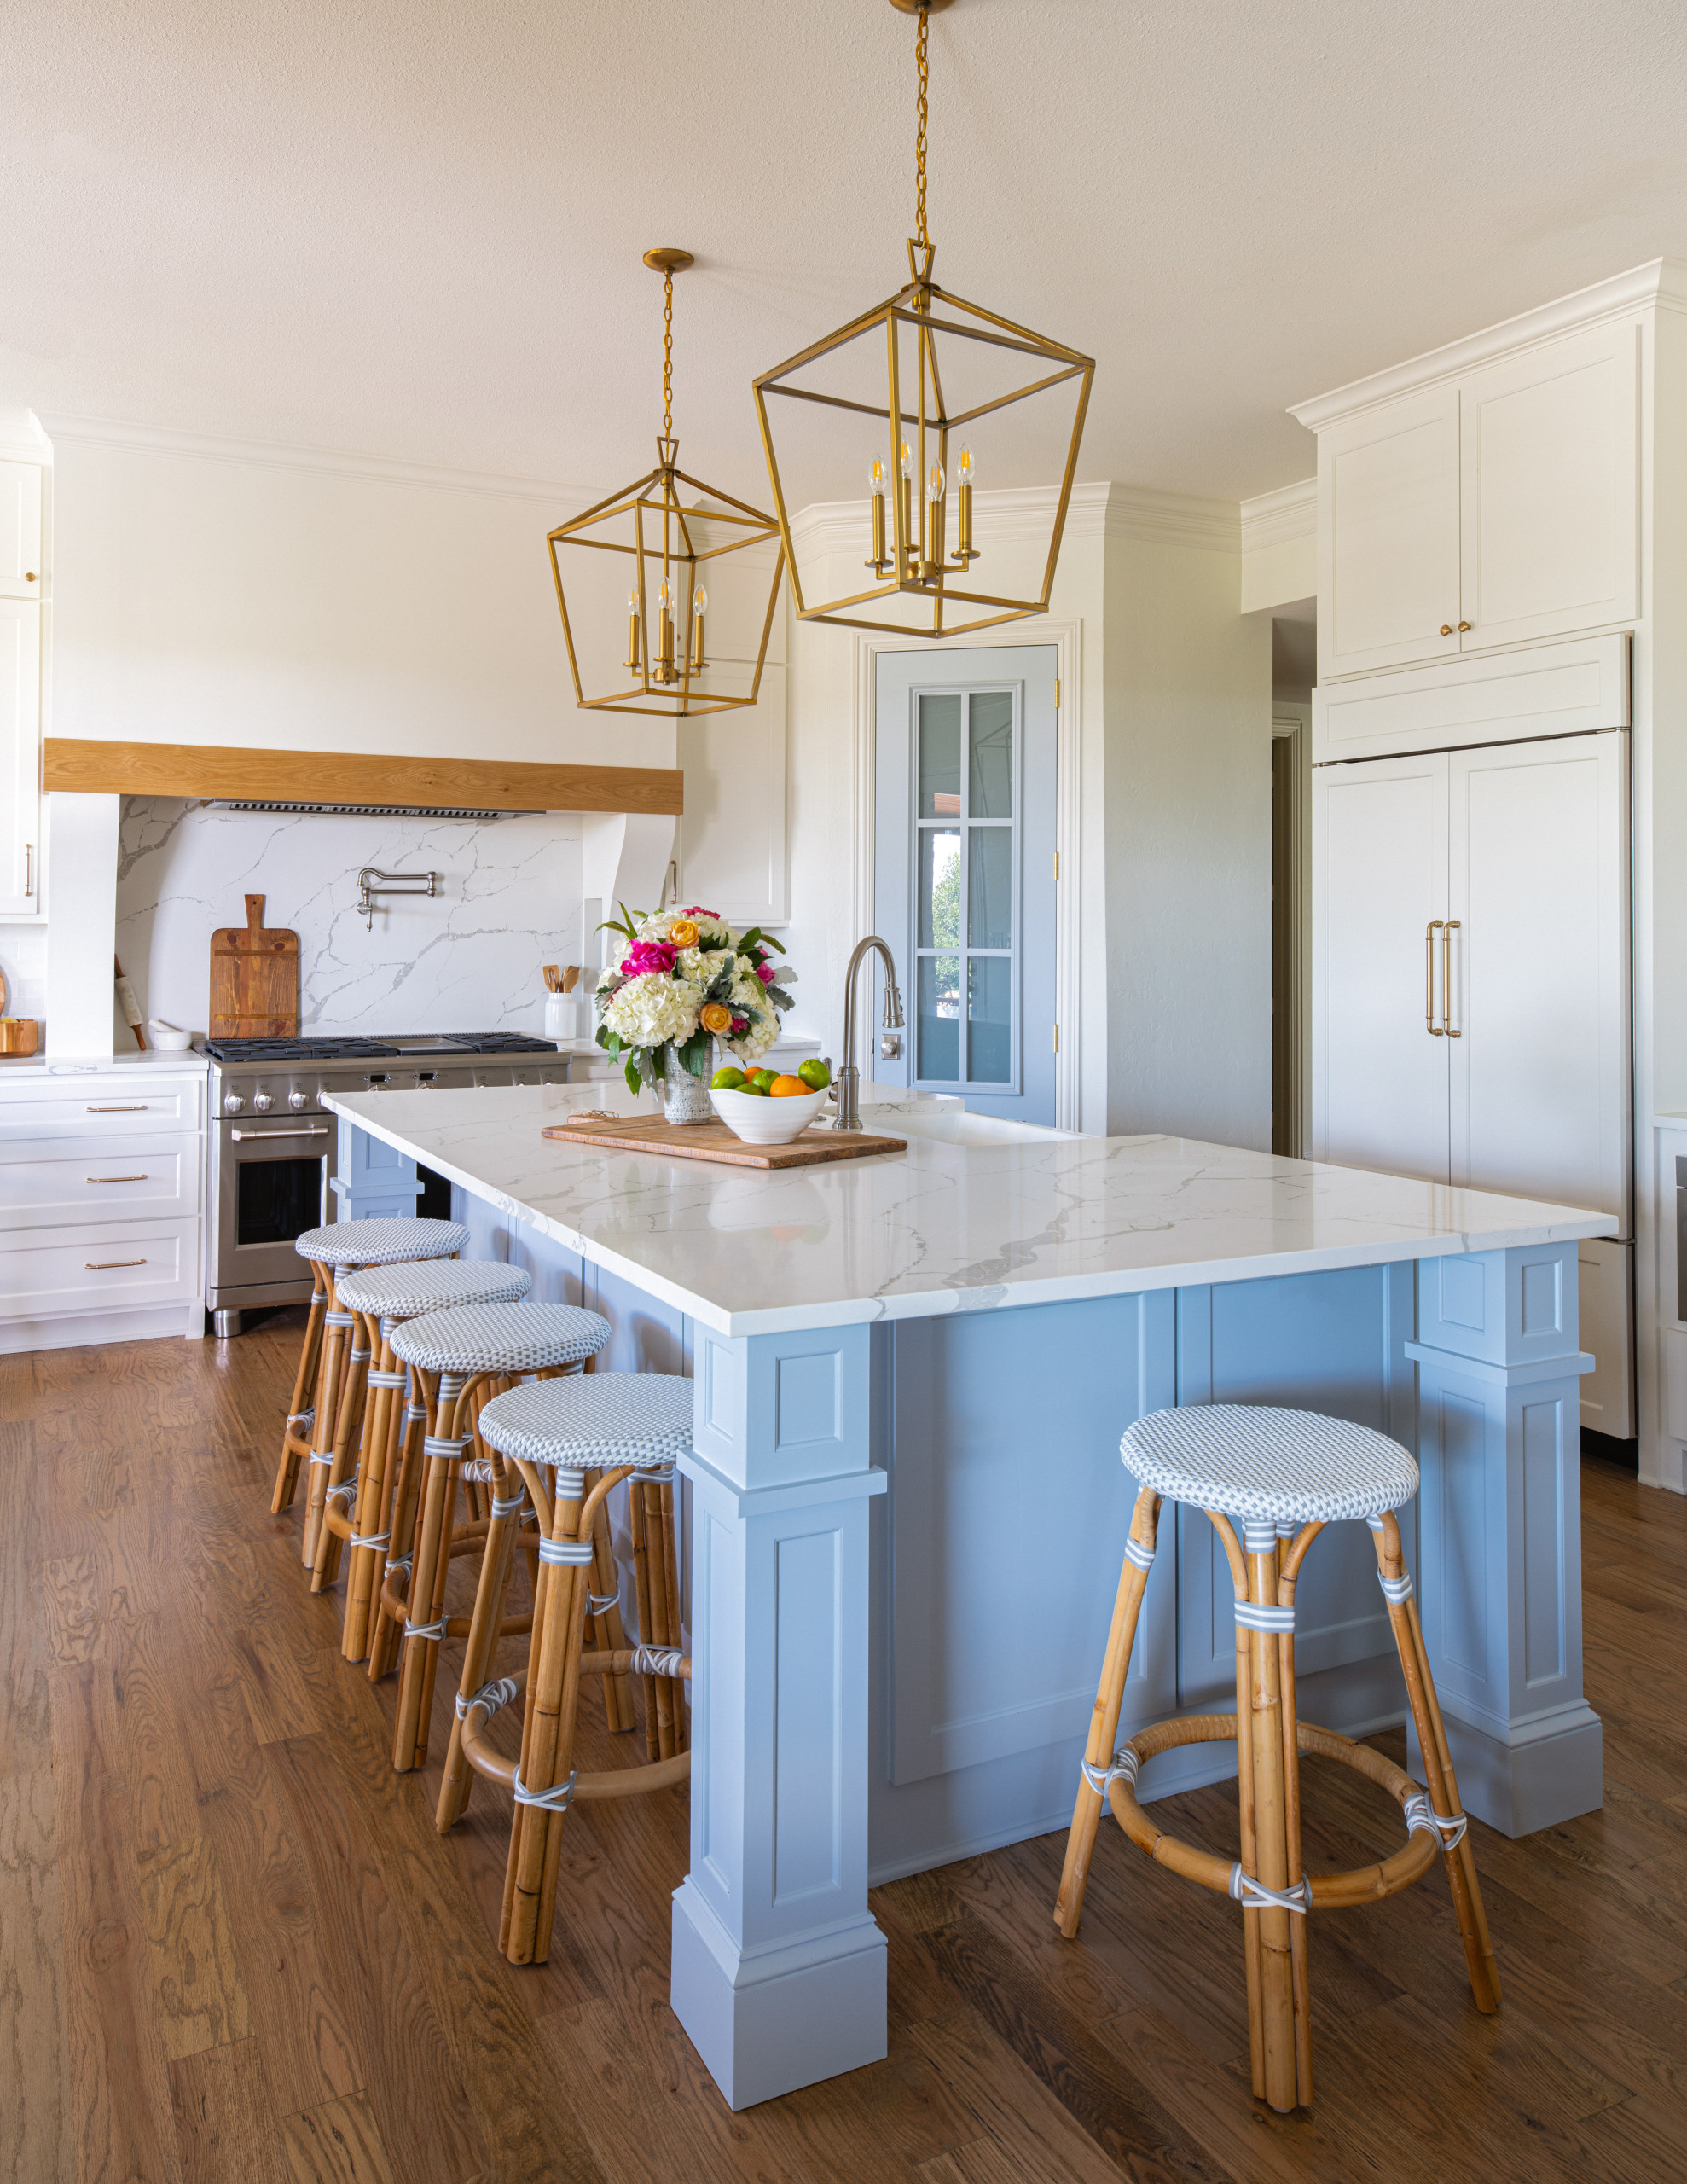 White transitional kitchen with large vent hood with white oak accent, blue island, blue pantry door, brass lighting, brass hardware, cast iron apron front sink.